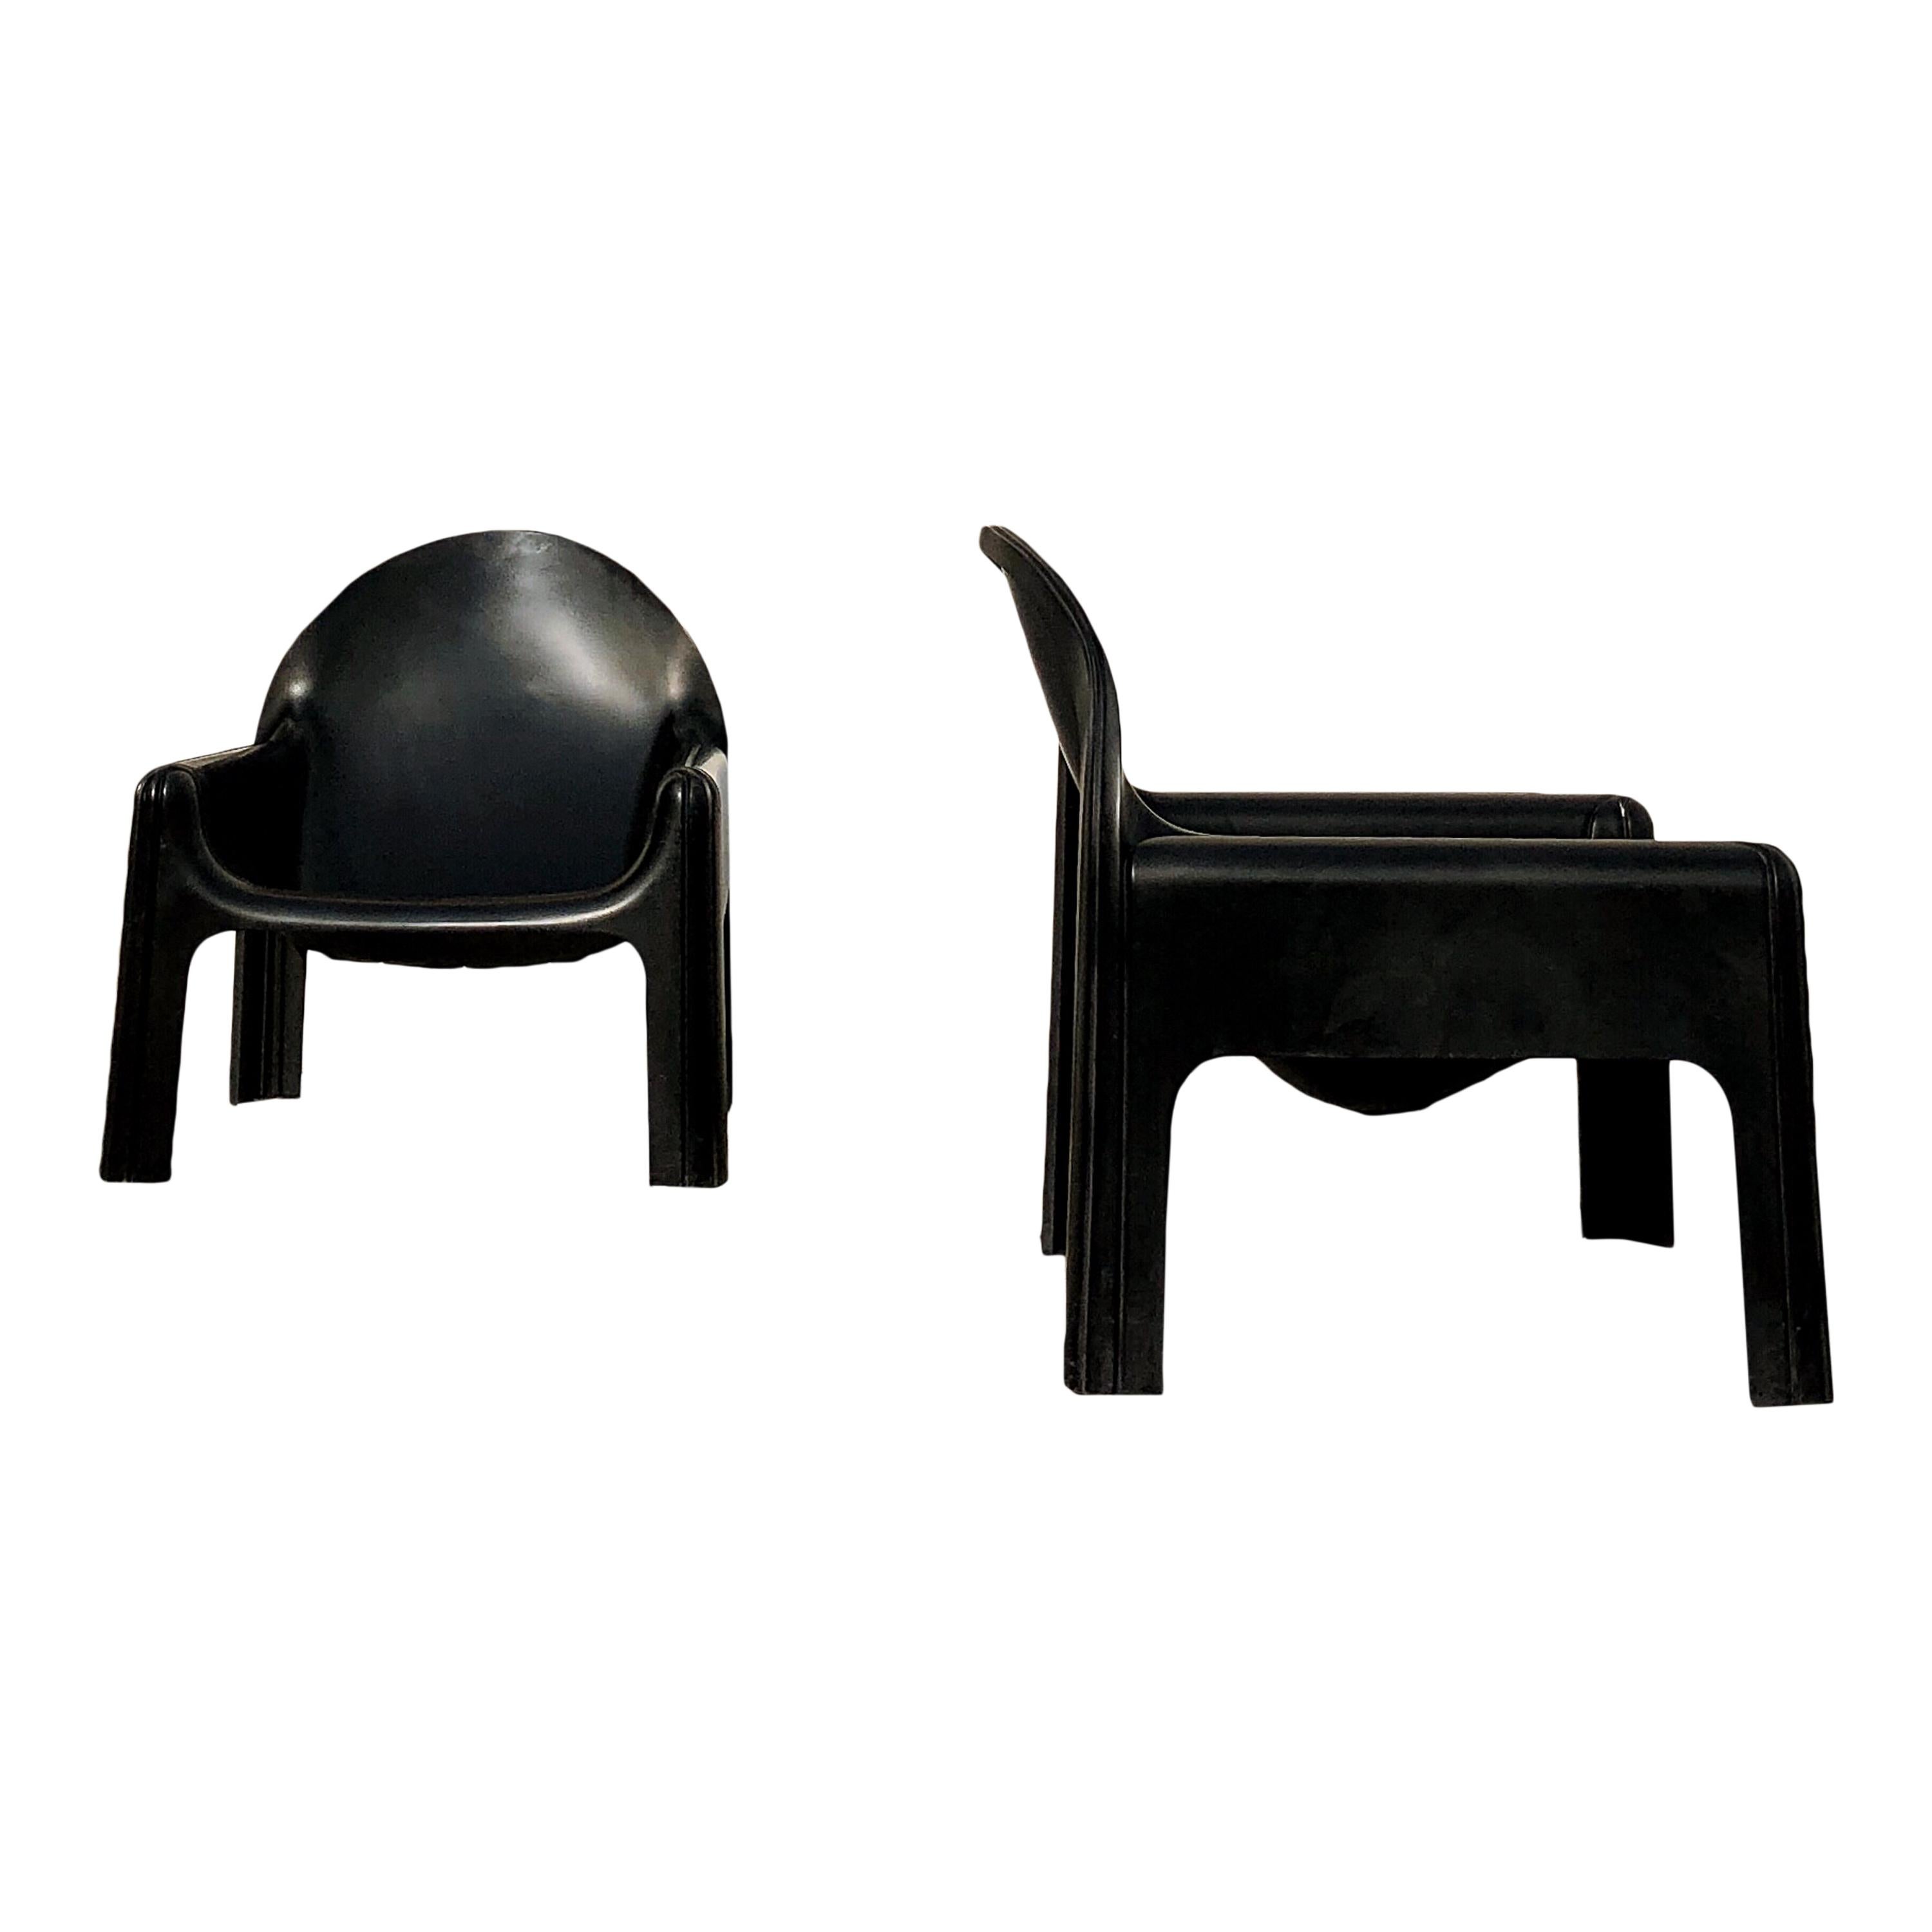 Rare pair of Italian lounge chairs 4794 by Gae Aulenti for Kartell, 1974.
This is the version in black which is hard to find. Molded black lacquered polyurethane.
In good original condition with minor wear consistent with age and use, preserving a